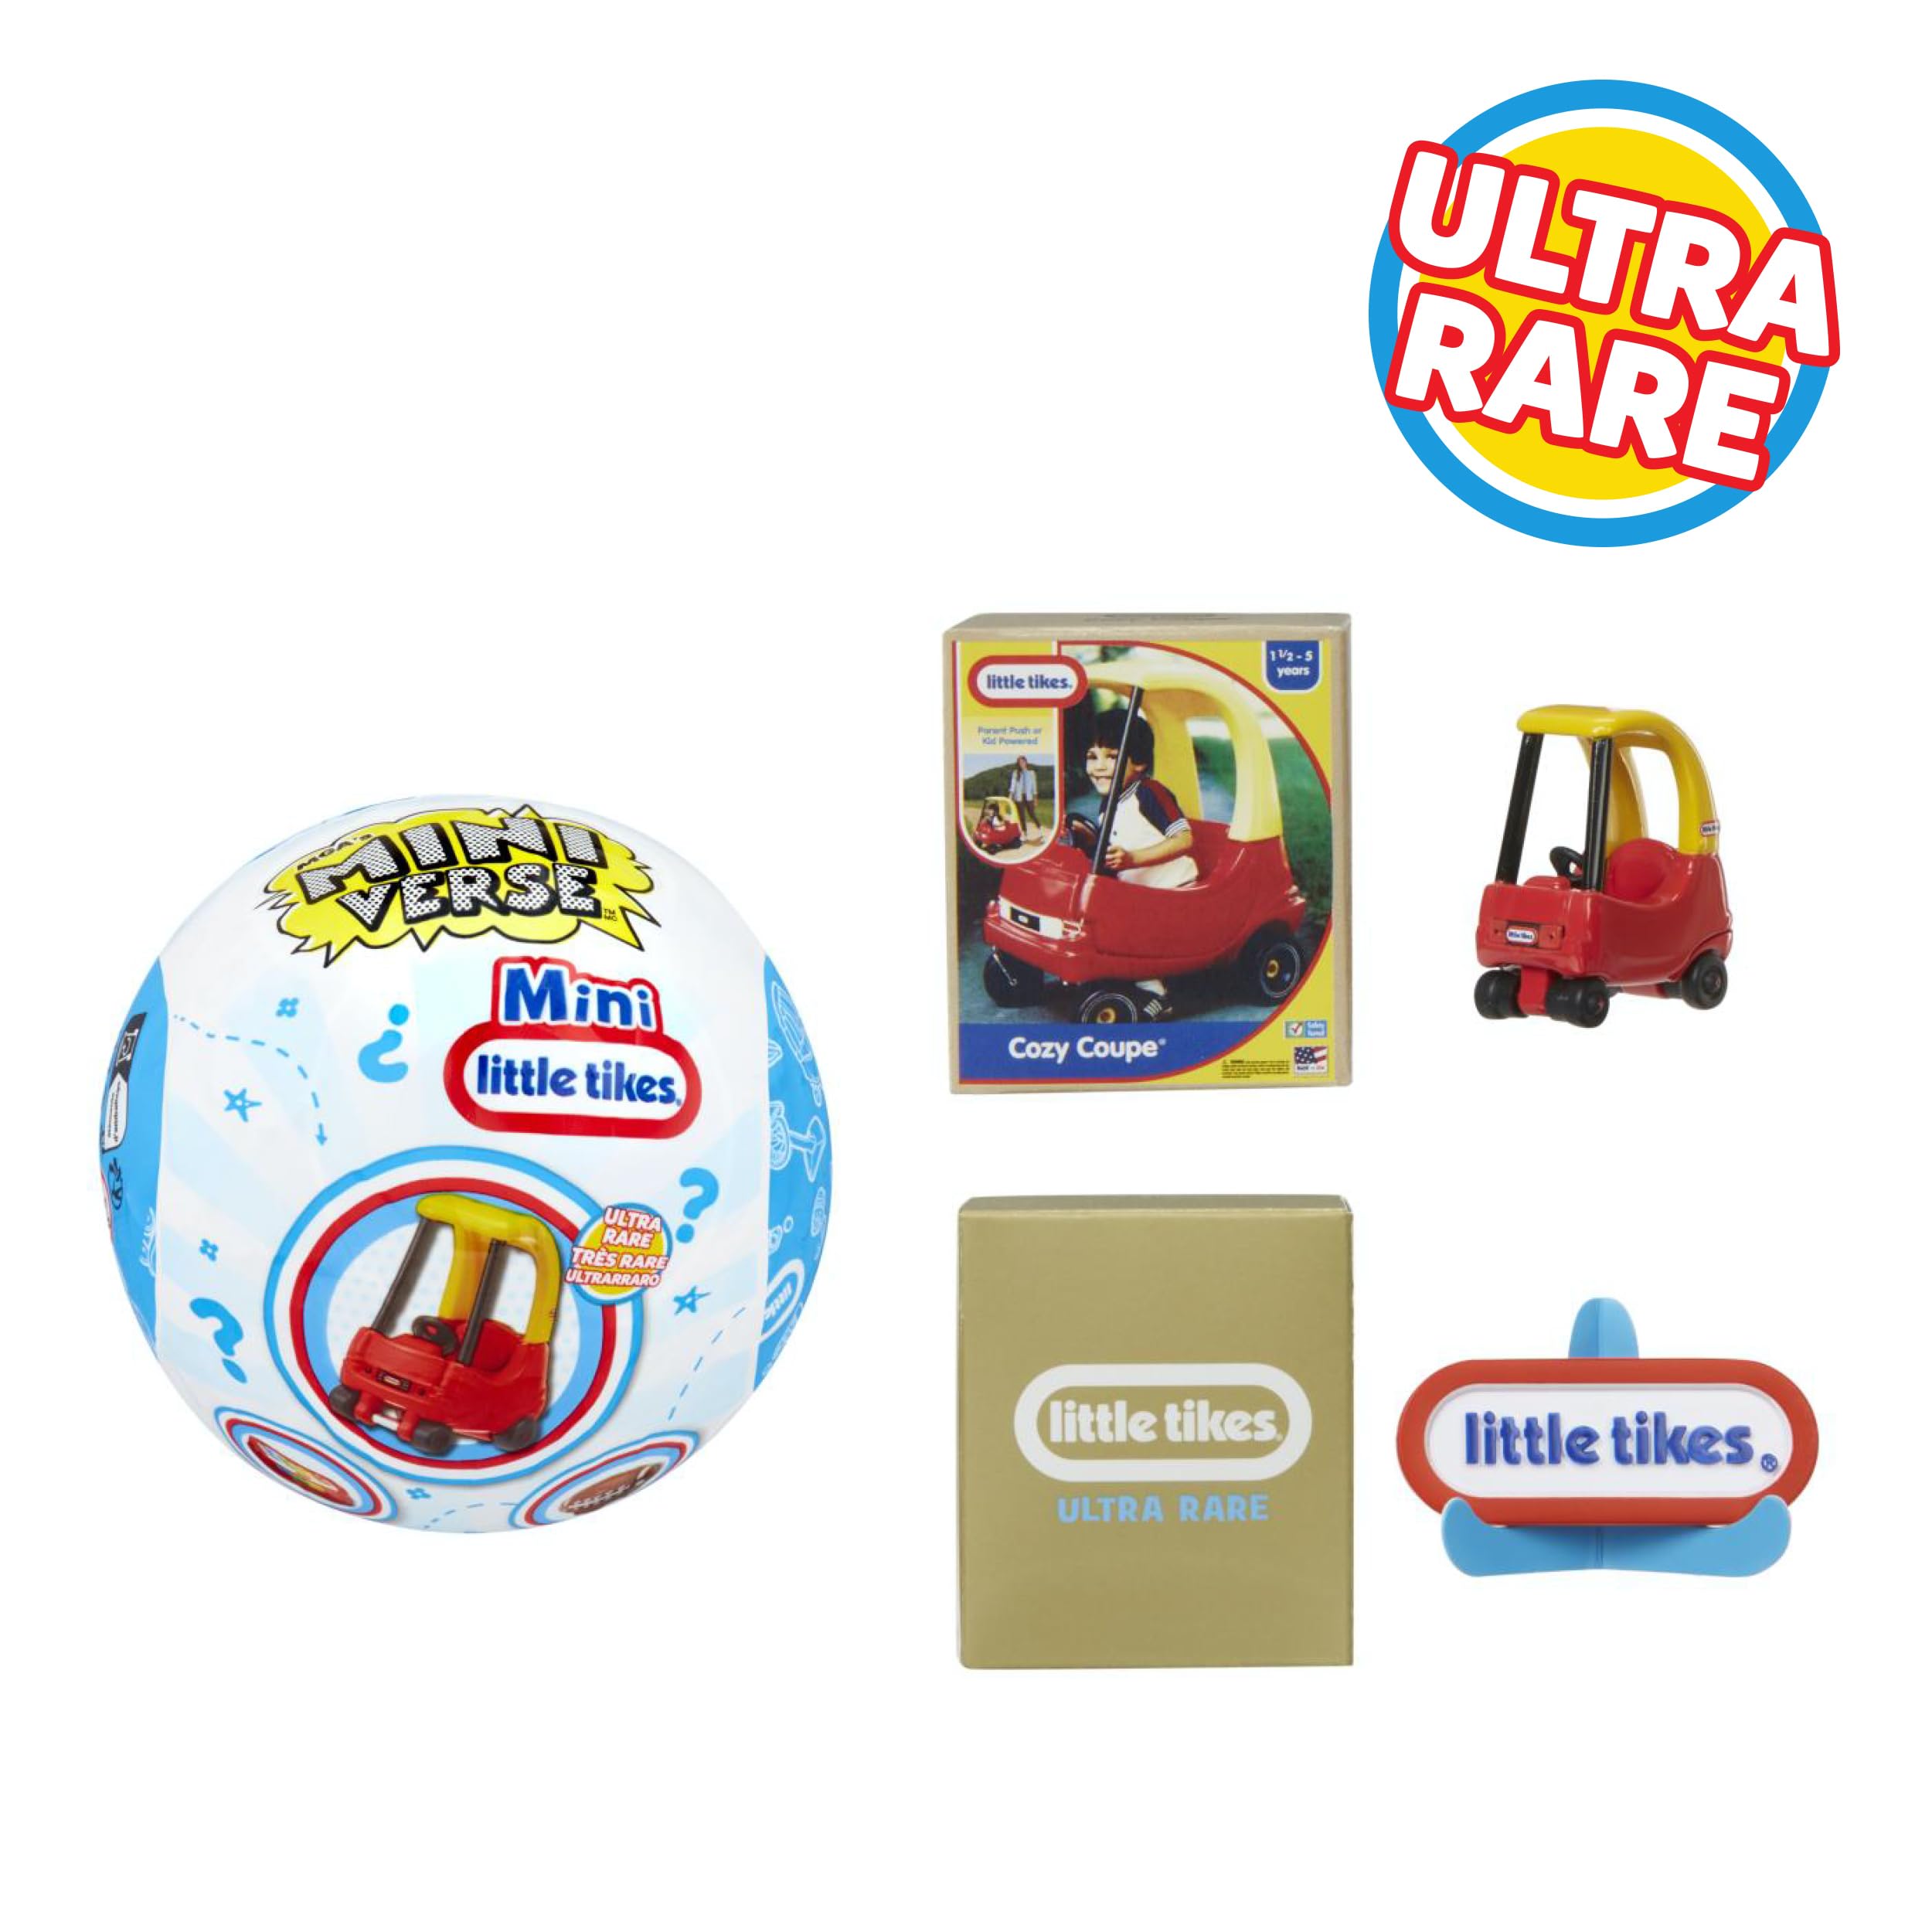 MGA's Miniverse Little Tikes Minis Series 3- Two Little Tikes Minis in Each Pack, Blind Packaging Doubles as Display, Retro, Nostalgic, Replica, Collectors Ages 6+